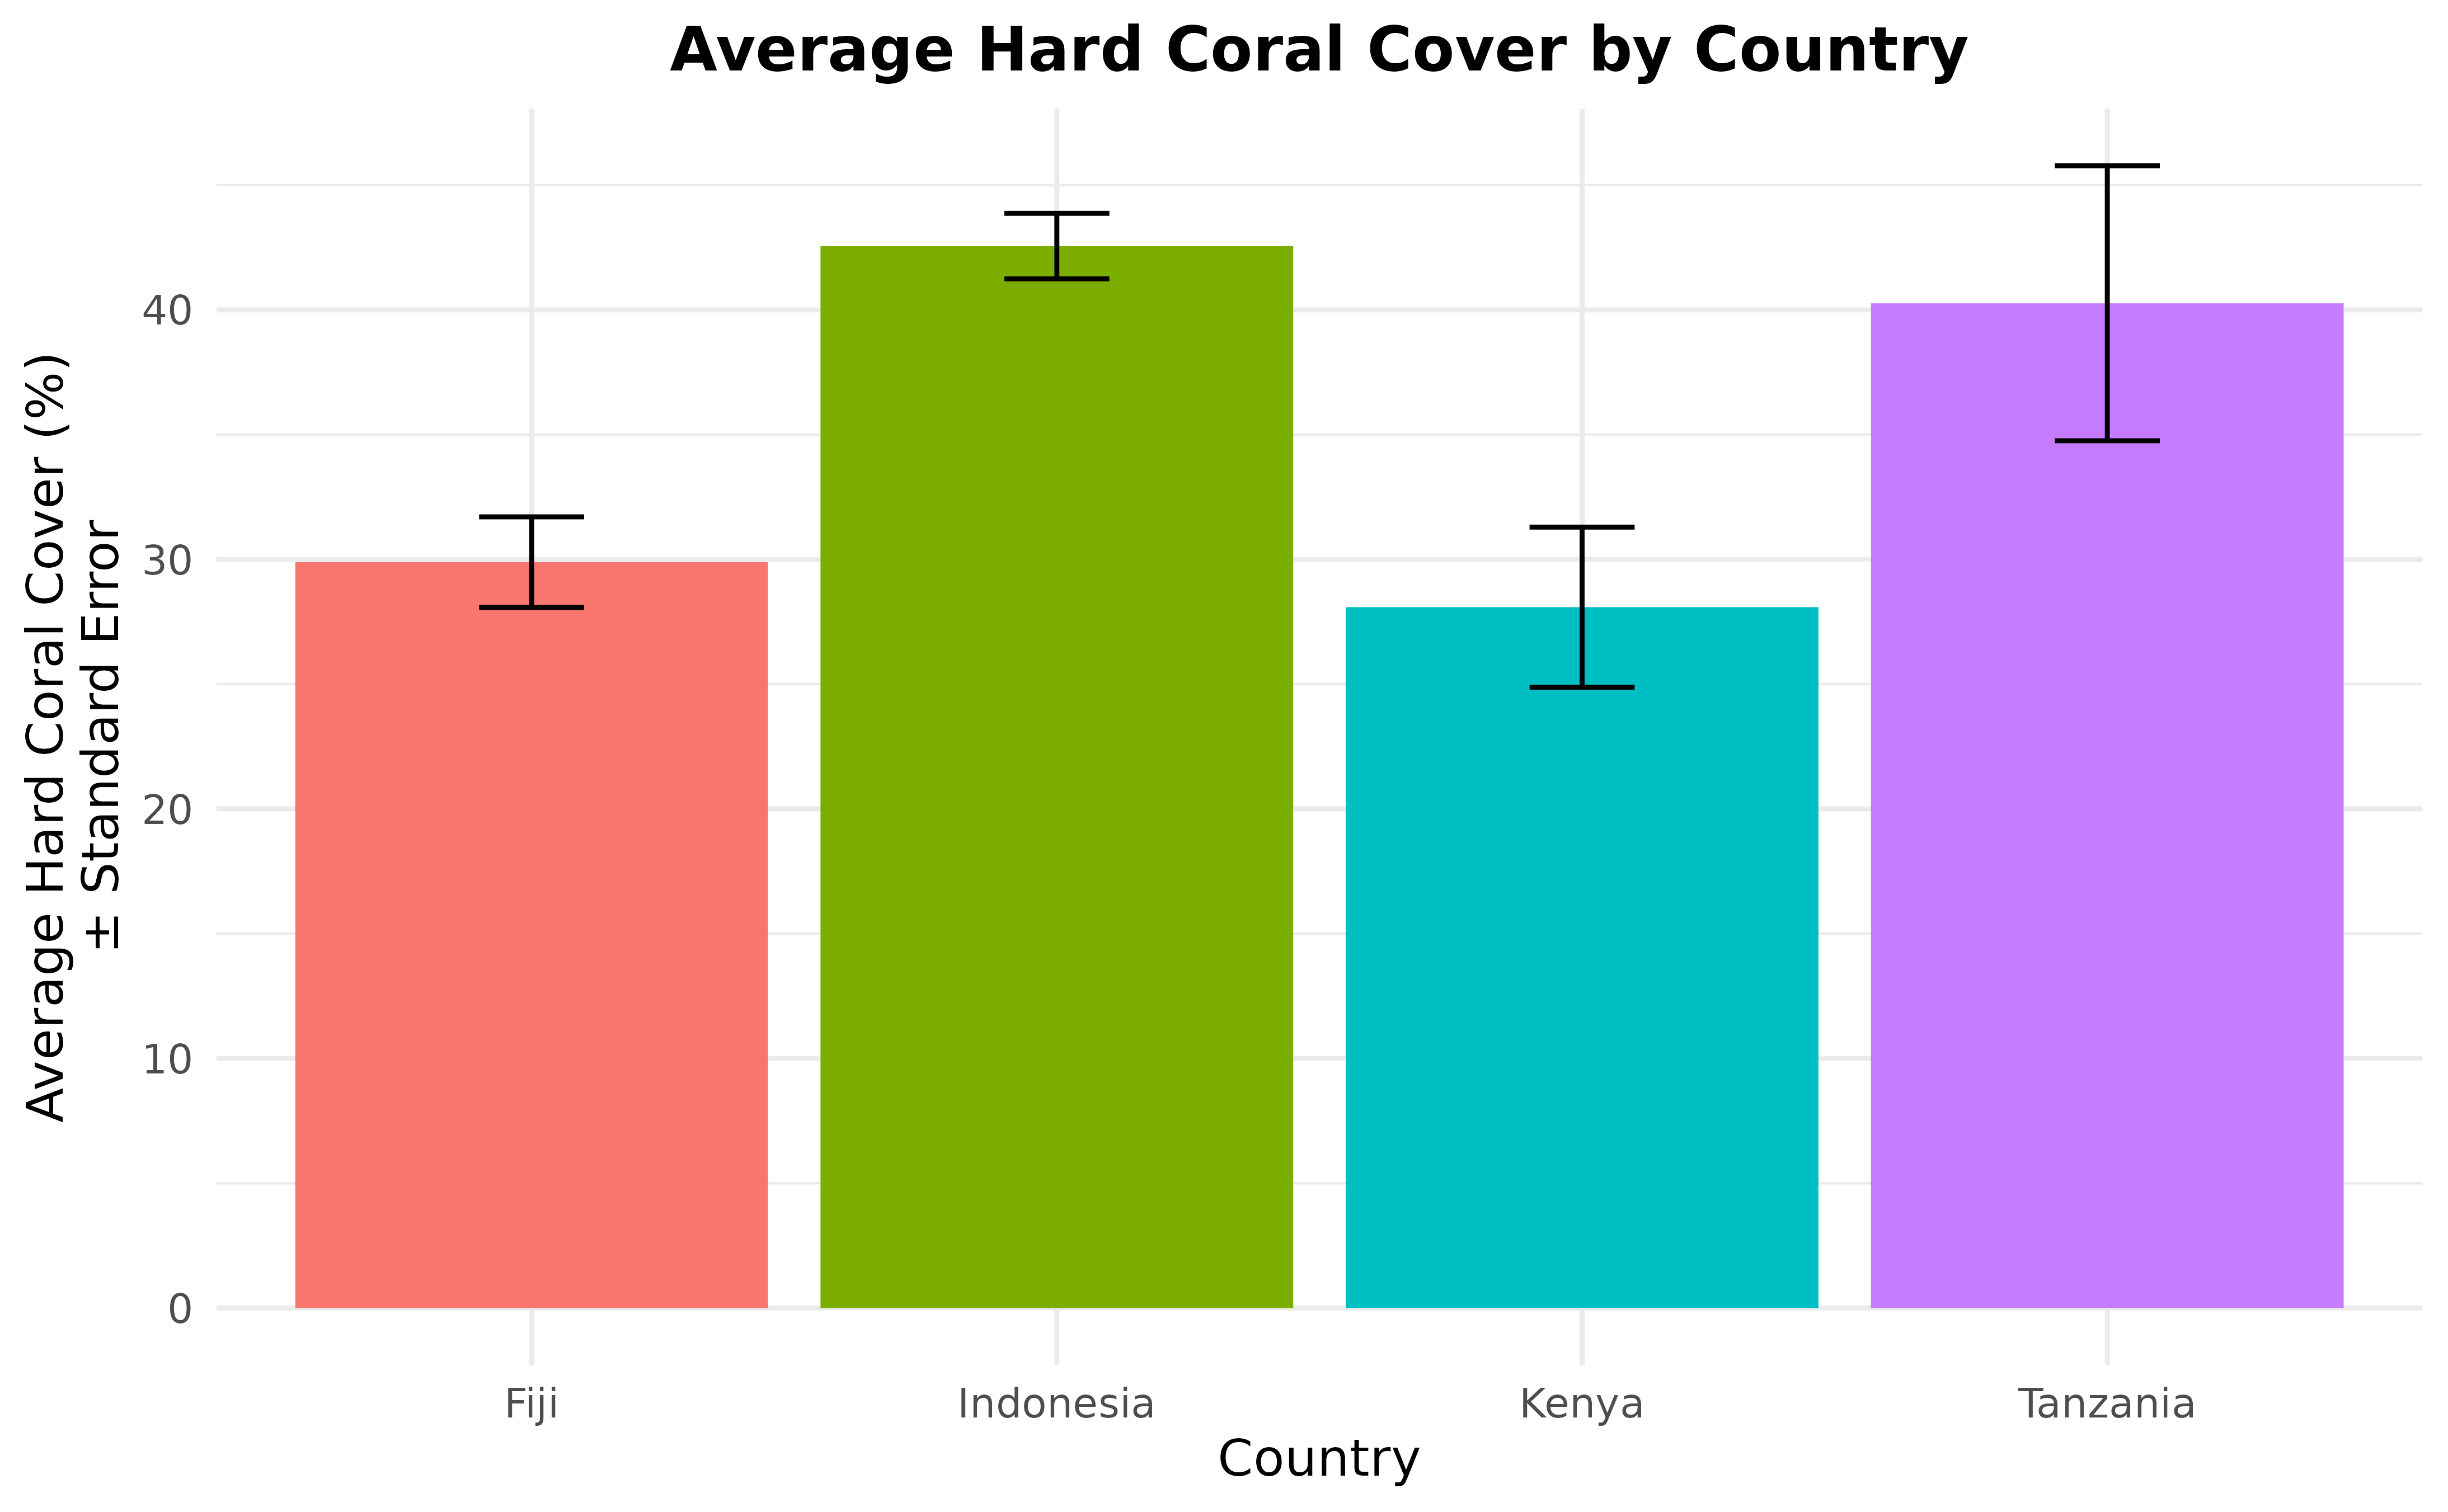 A bar chart with country on the x axis and average hard coral cover on the y axis. The bars are colored in according to country. The bar chart has a standard error for each country, using site as the replicates. The plot now has a title: Average Hard Coral Cover by Country. The x axis is titled: Country and the y axis is titled: Average Hard Coral Cover (%) plus or minus standard error.